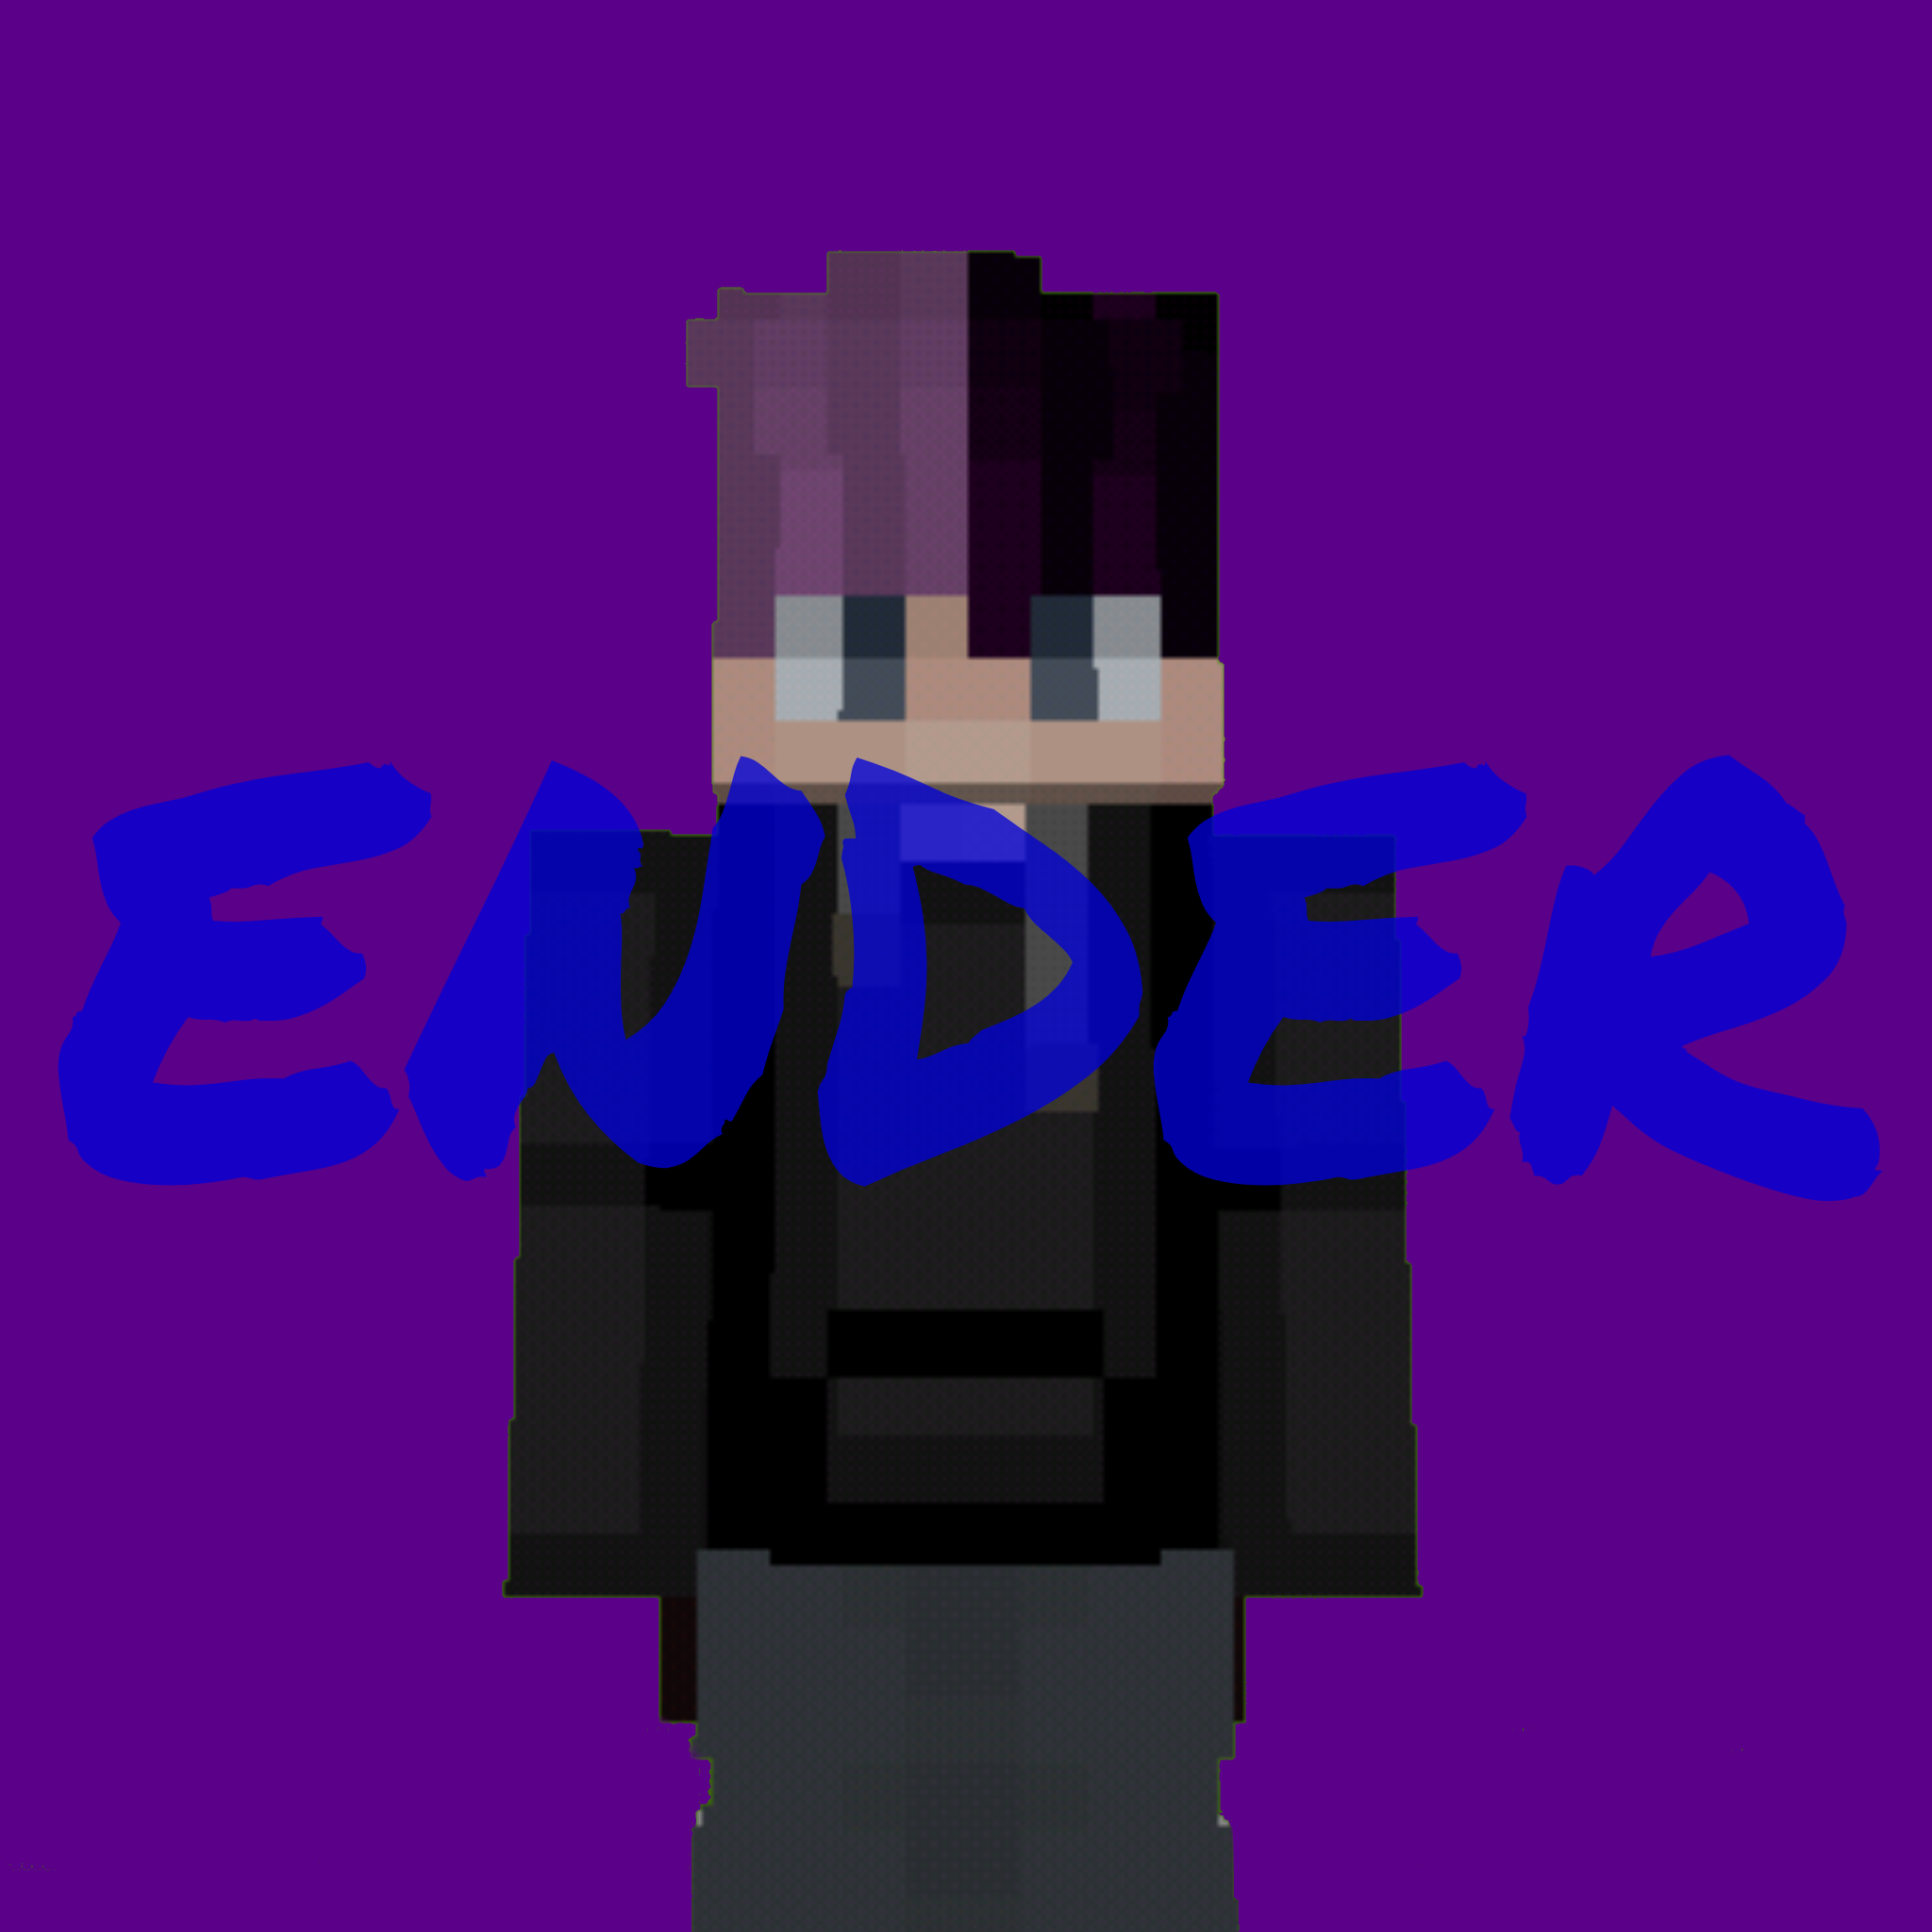 Ender's Profile Picture on PvPRP